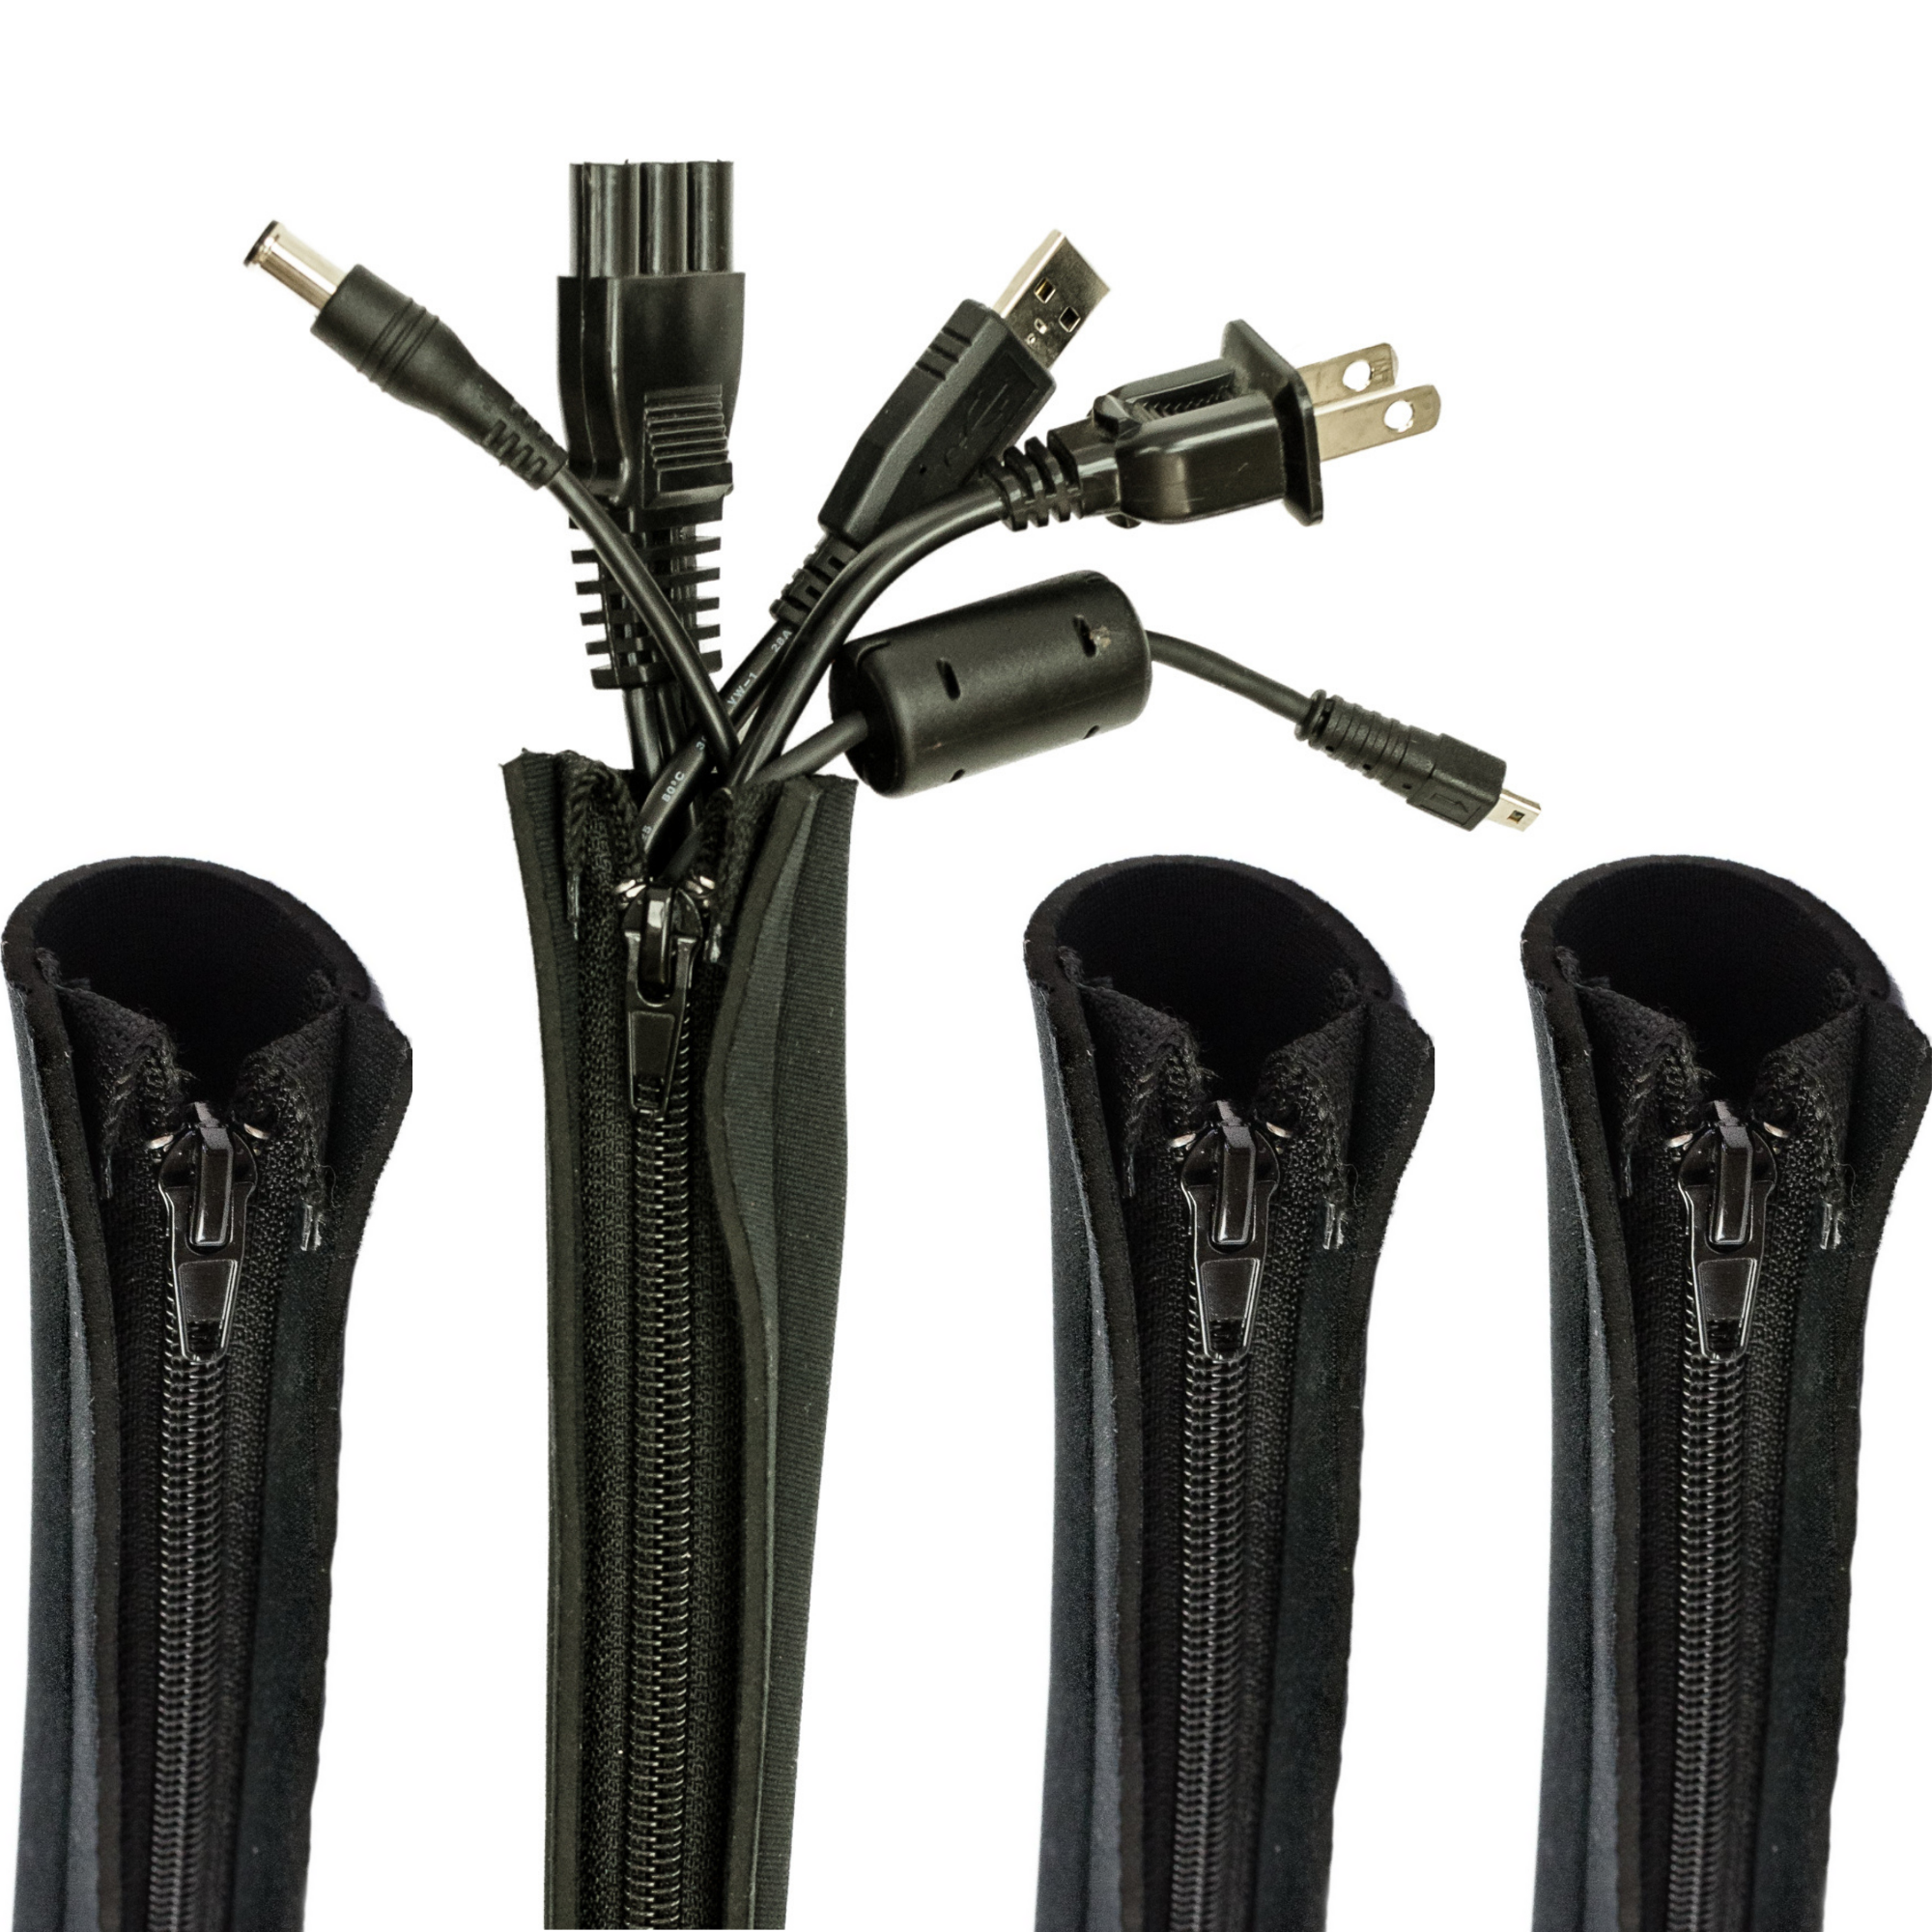 Cable Sleeves-Cord Management-Wire Organizer-Wrap,Hider,Cover-4